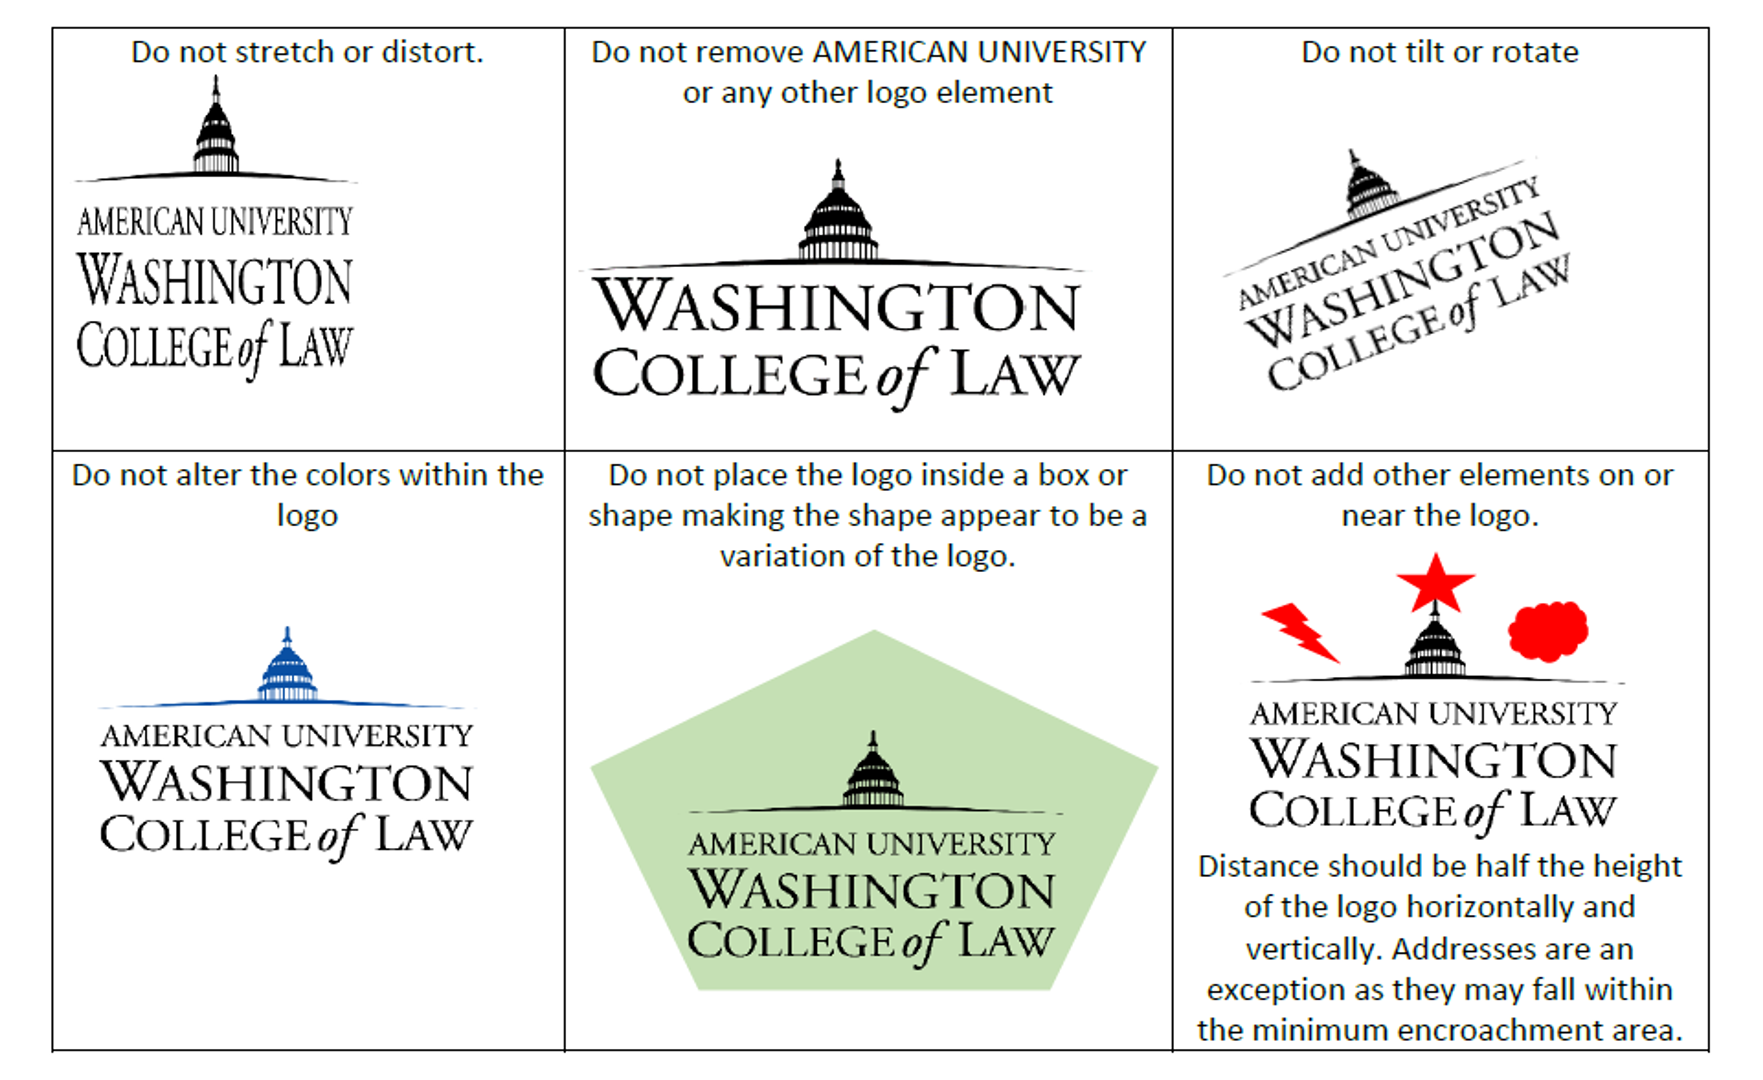 Image of what NOT to do with AUWCL logo